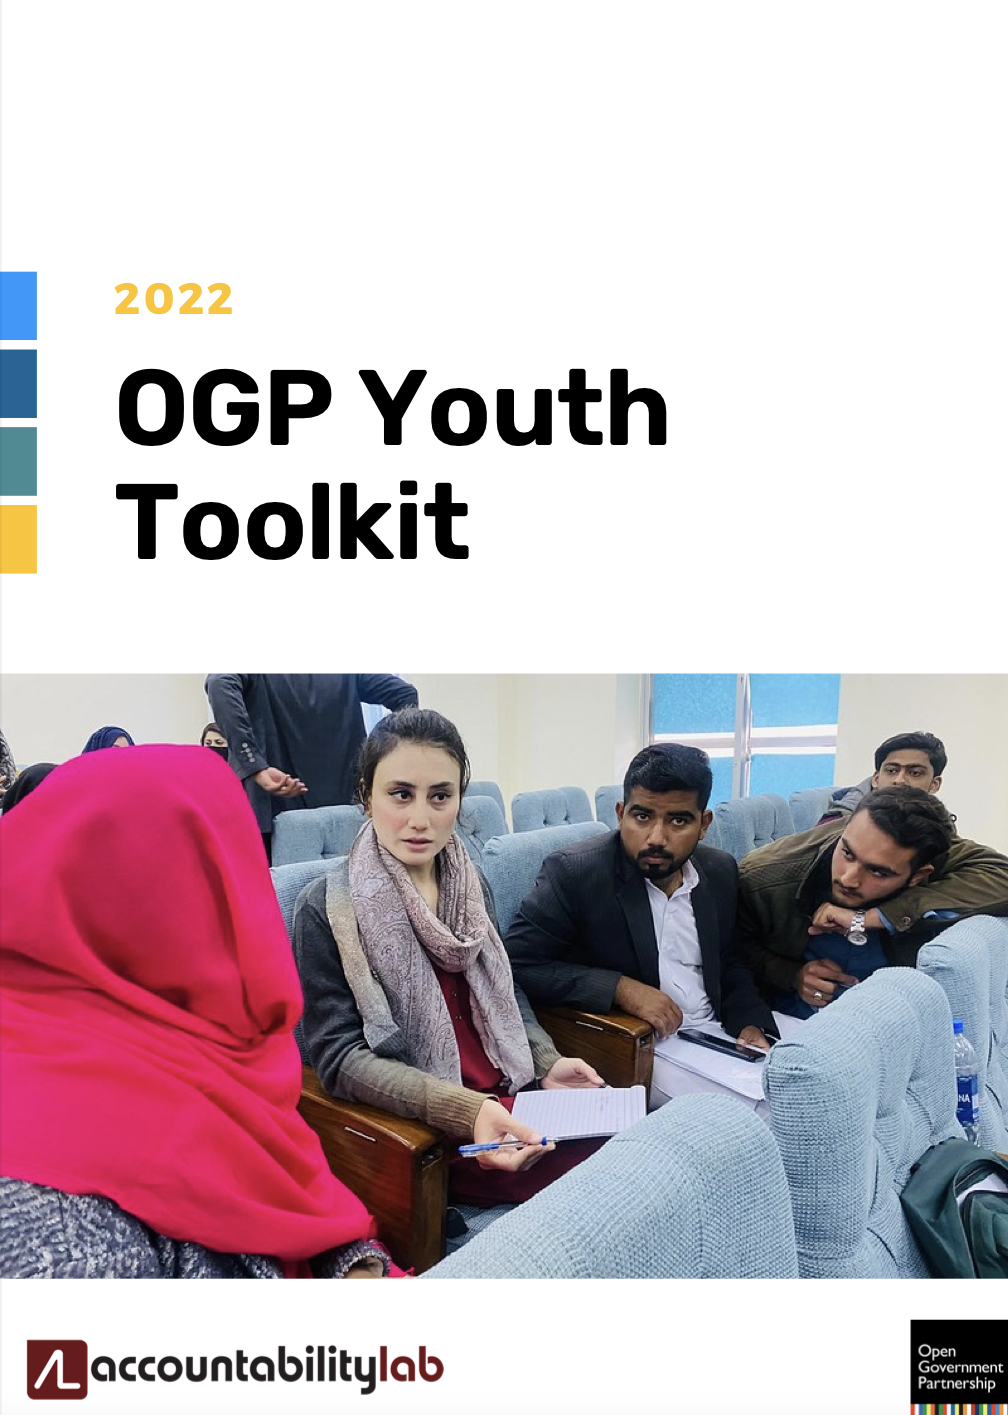 2022 OGP Youth Toolkit